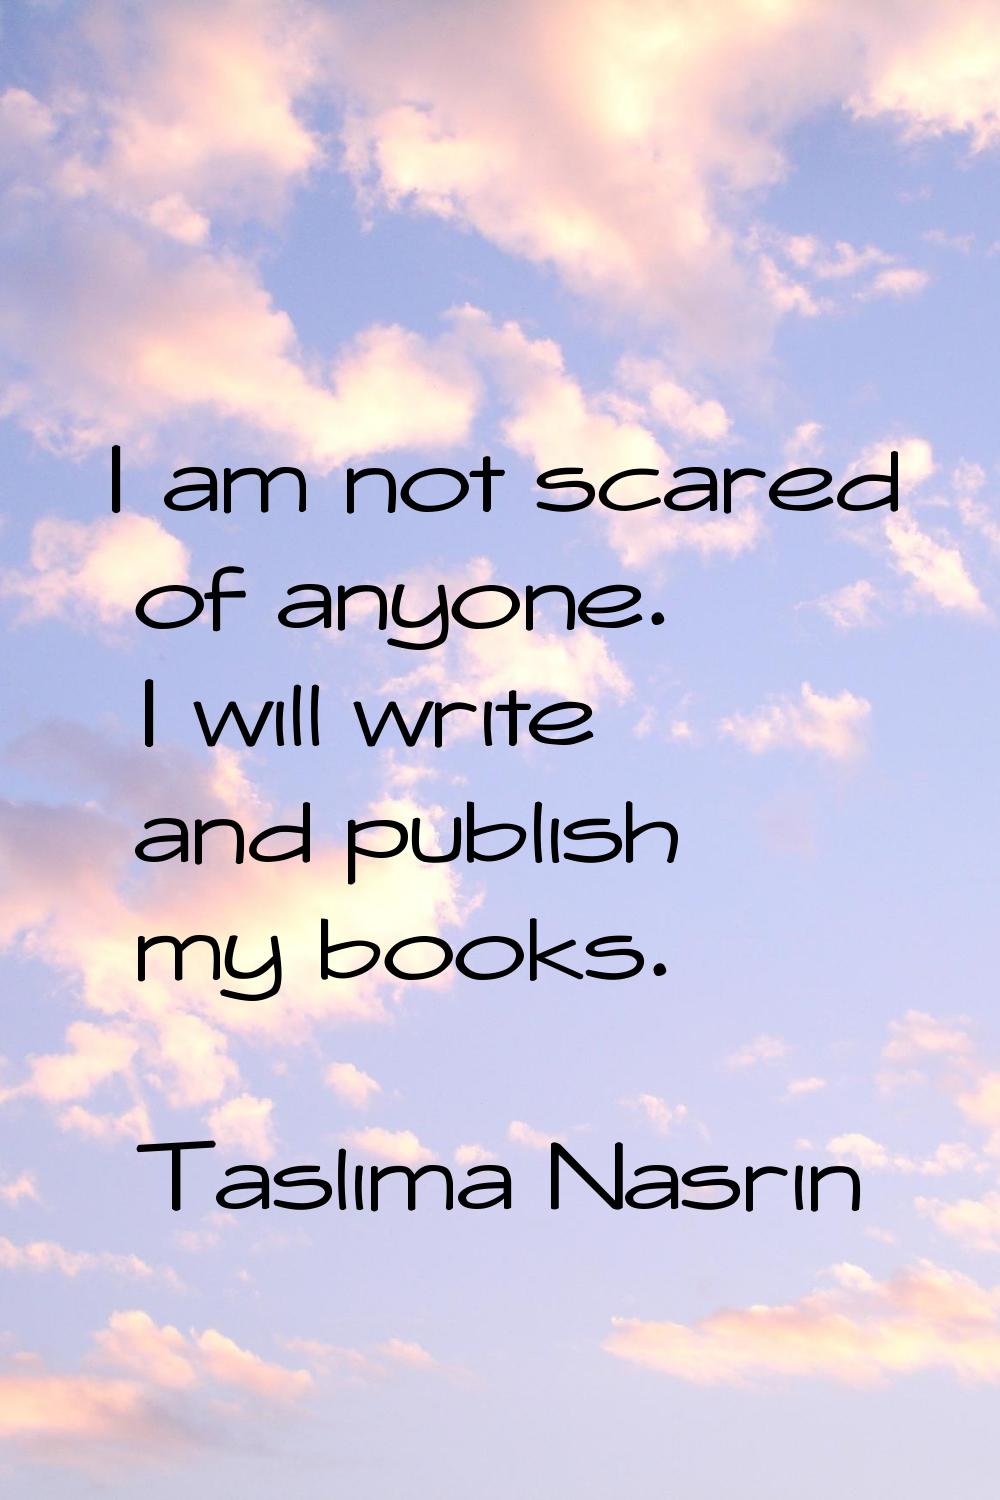 I am not scared of anyone. I will write and publish my books.